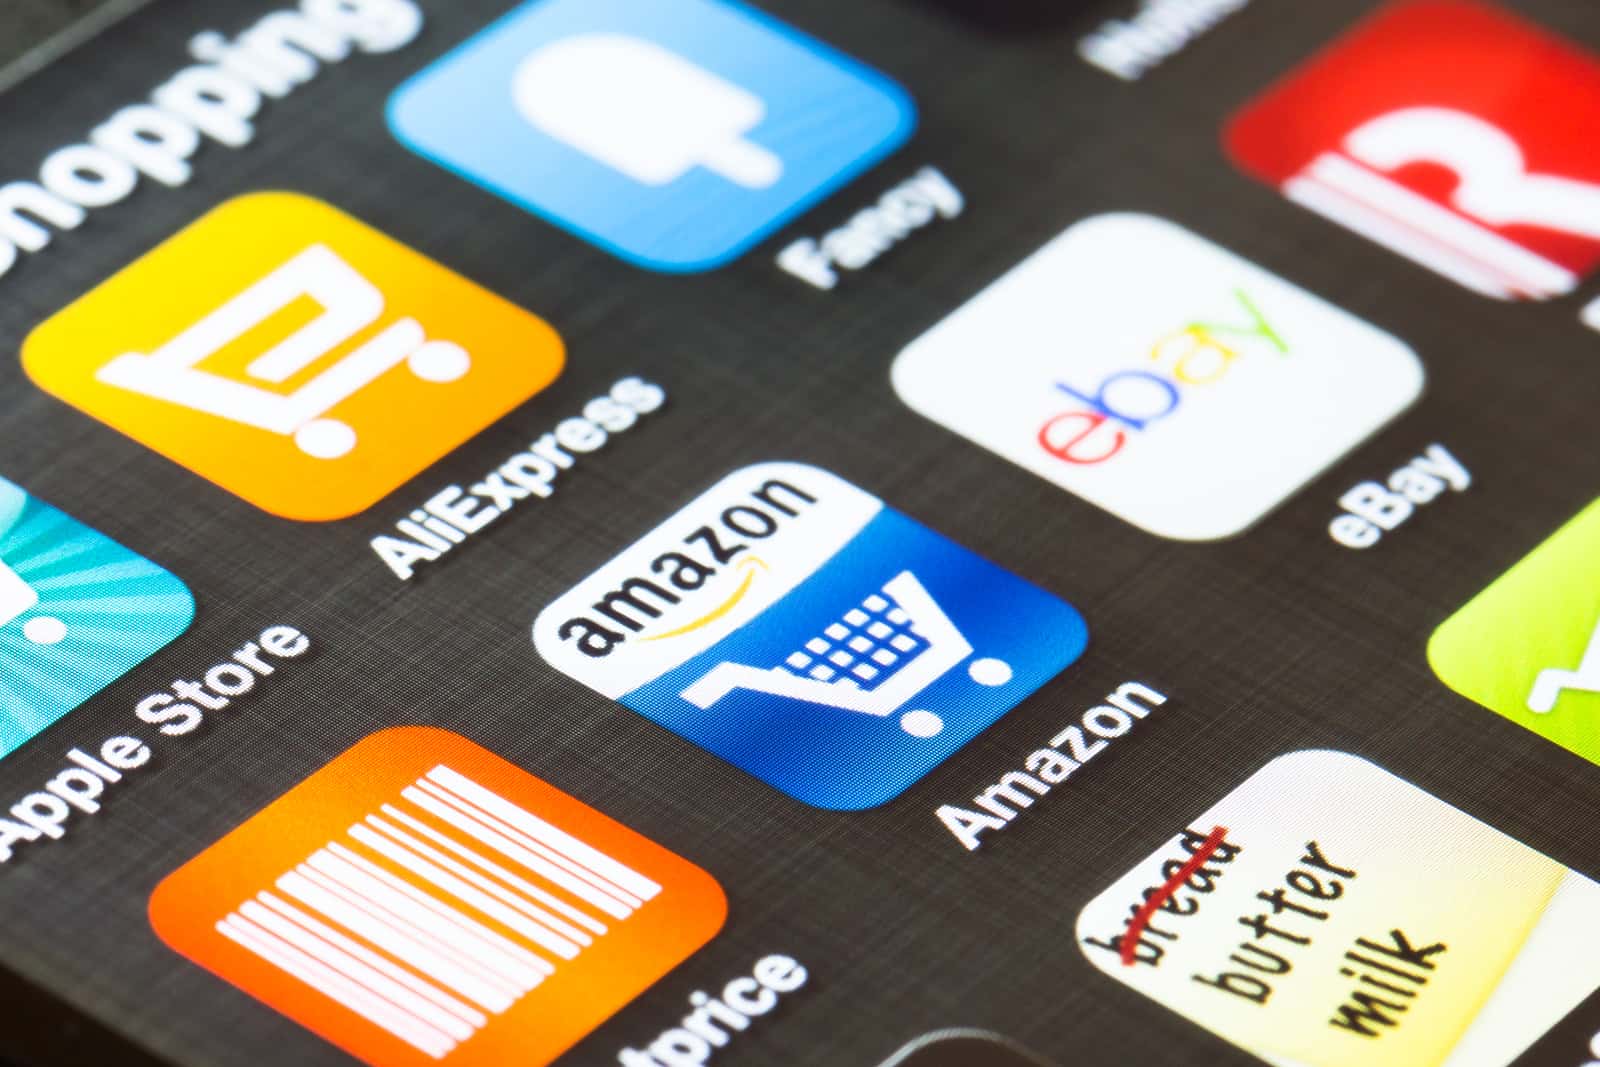 Businesses struggle to maintain control of their brand on Amazon